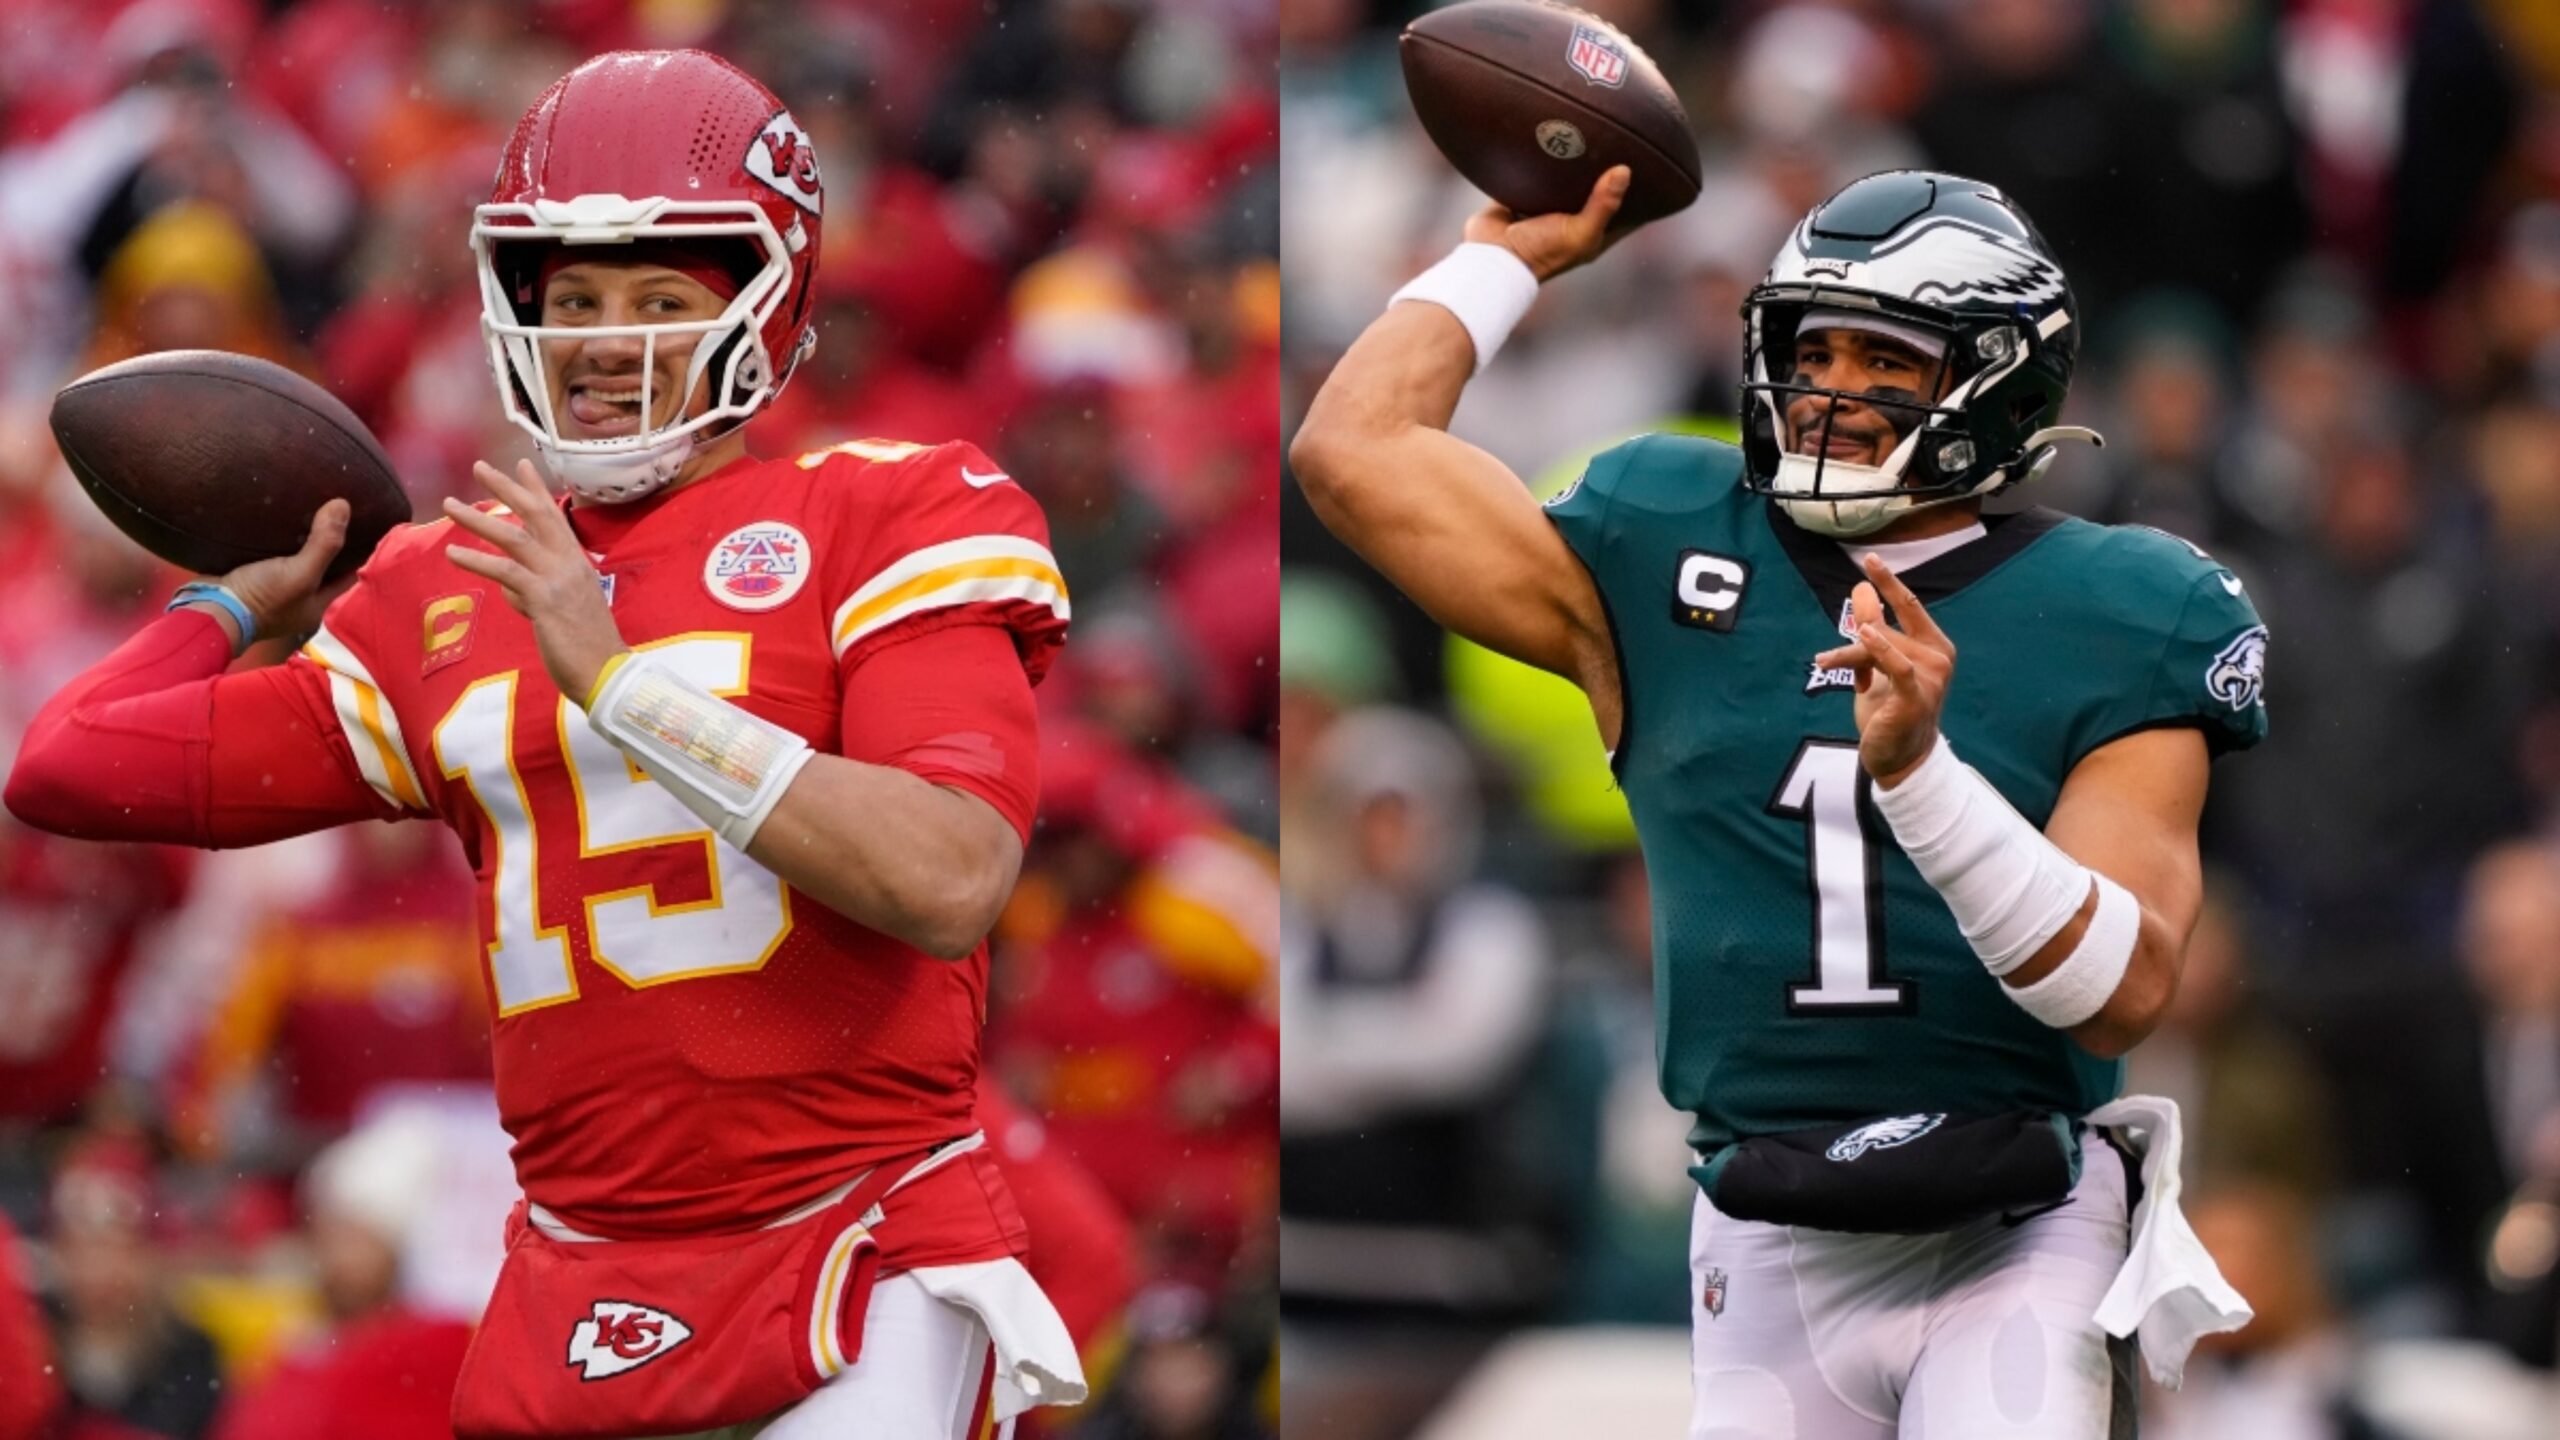 Bet $10, Get $200 in Bonus Bets if Mahomes or Hurts Passes for 1+ Yard! article feature image